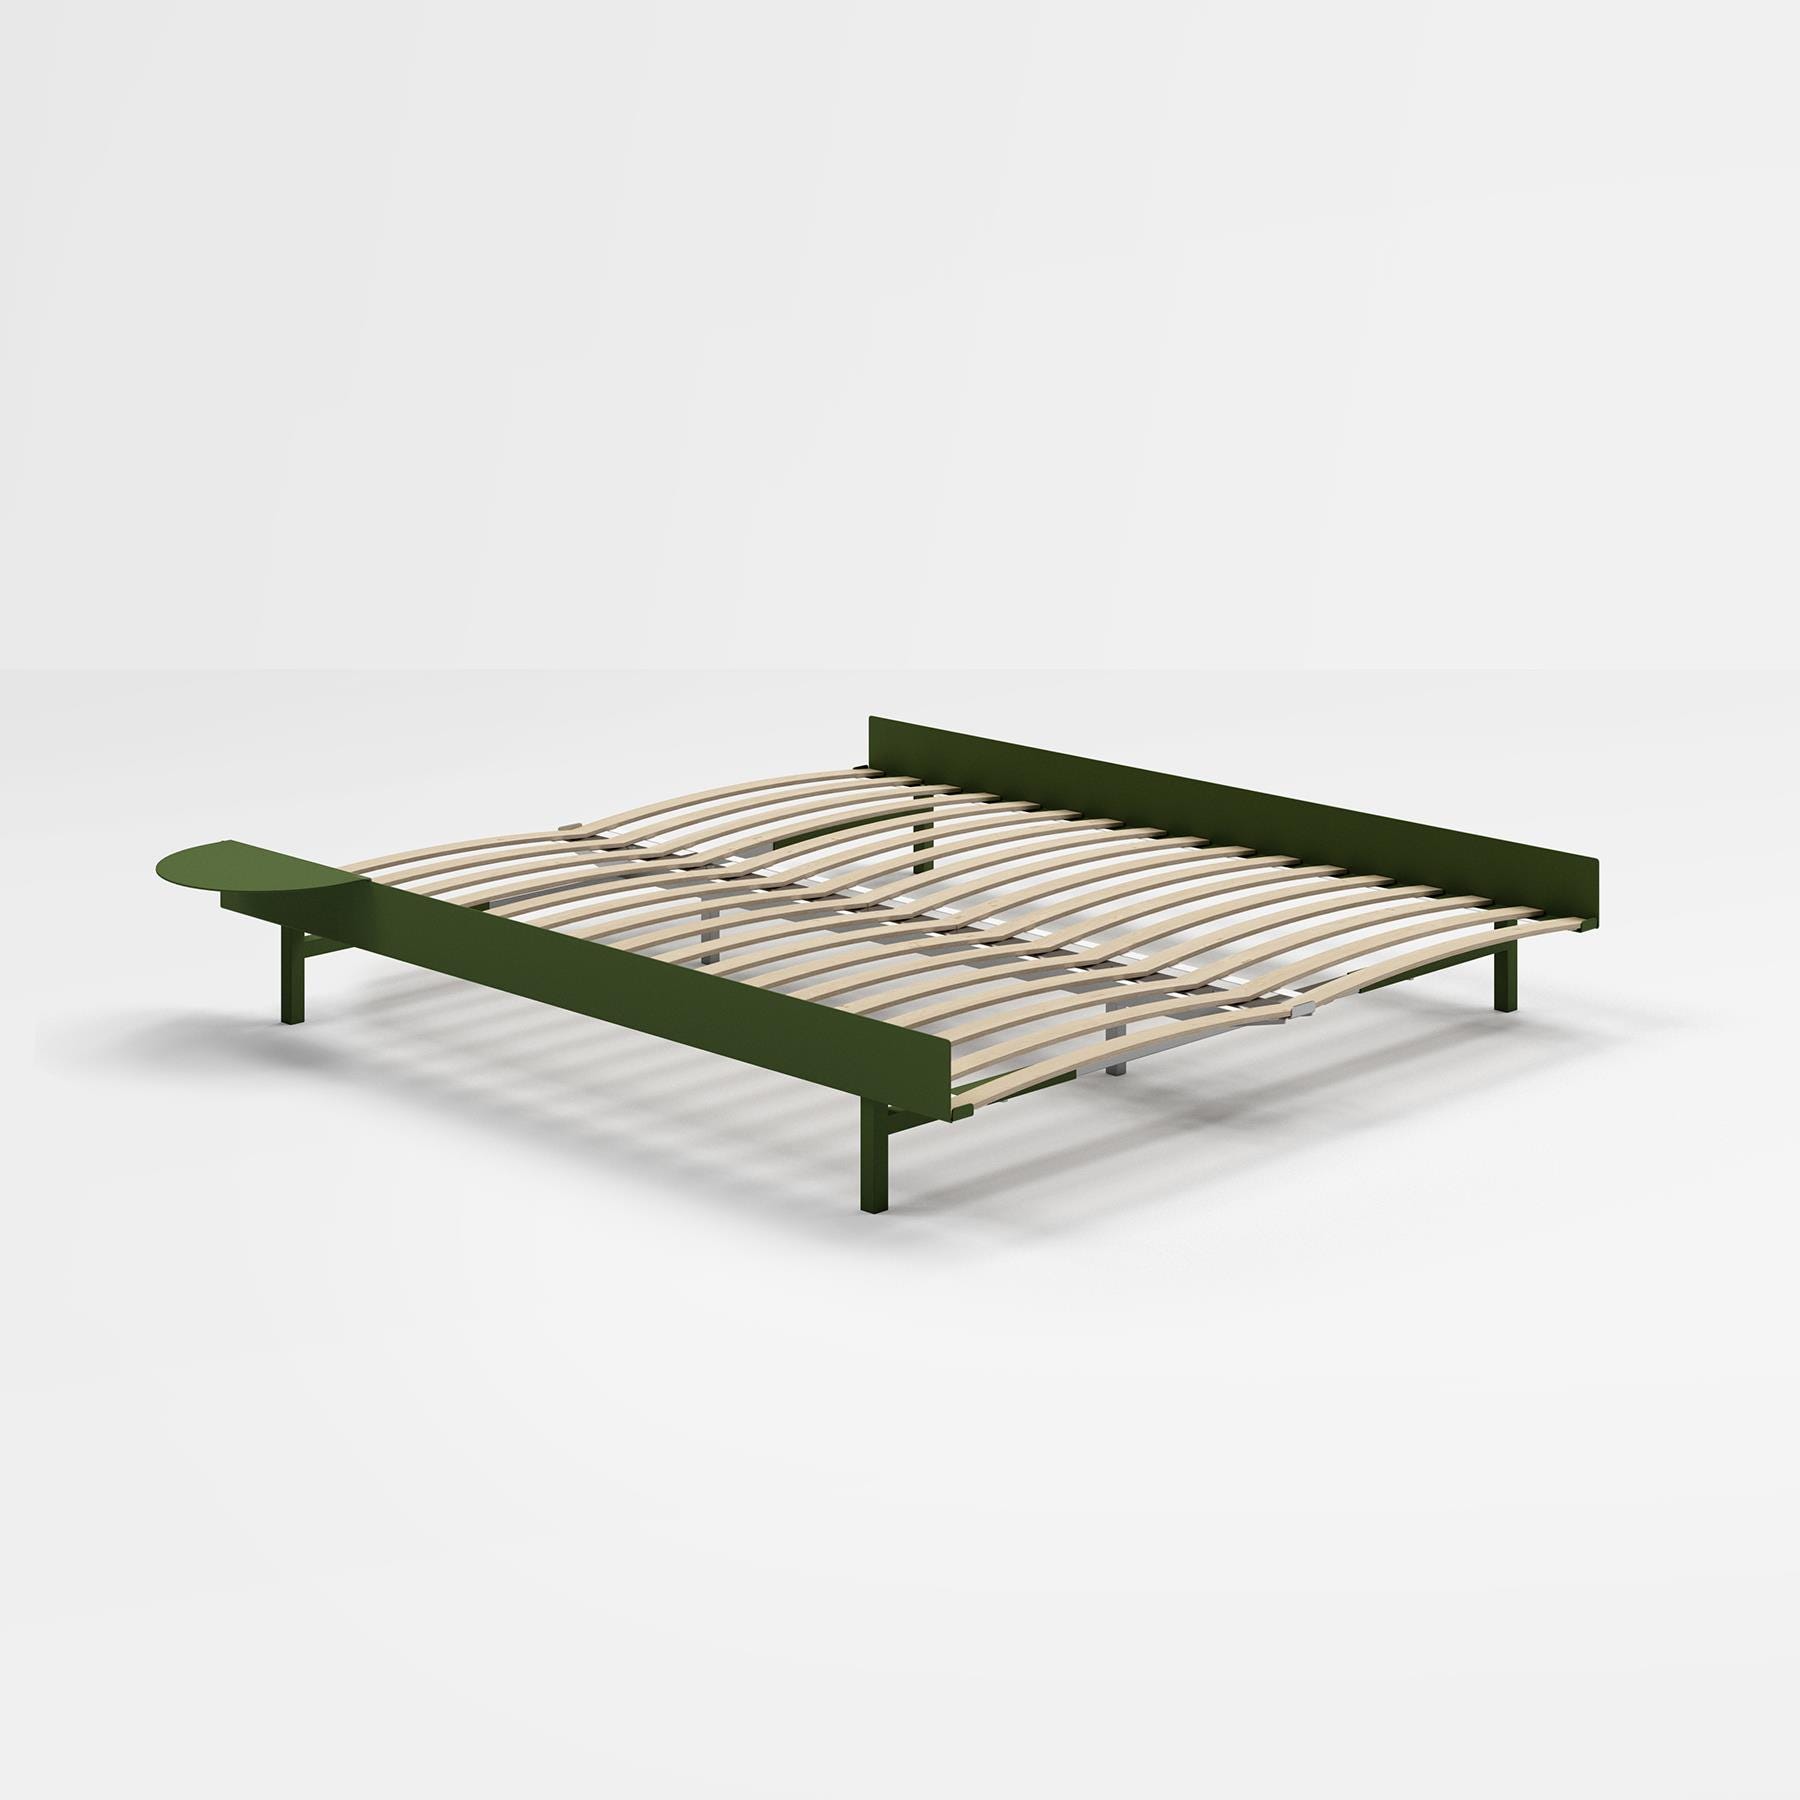 Moebe Bed King Pine Green 1 Side Table Green Designer Furniture From Holloways Of Ludlow